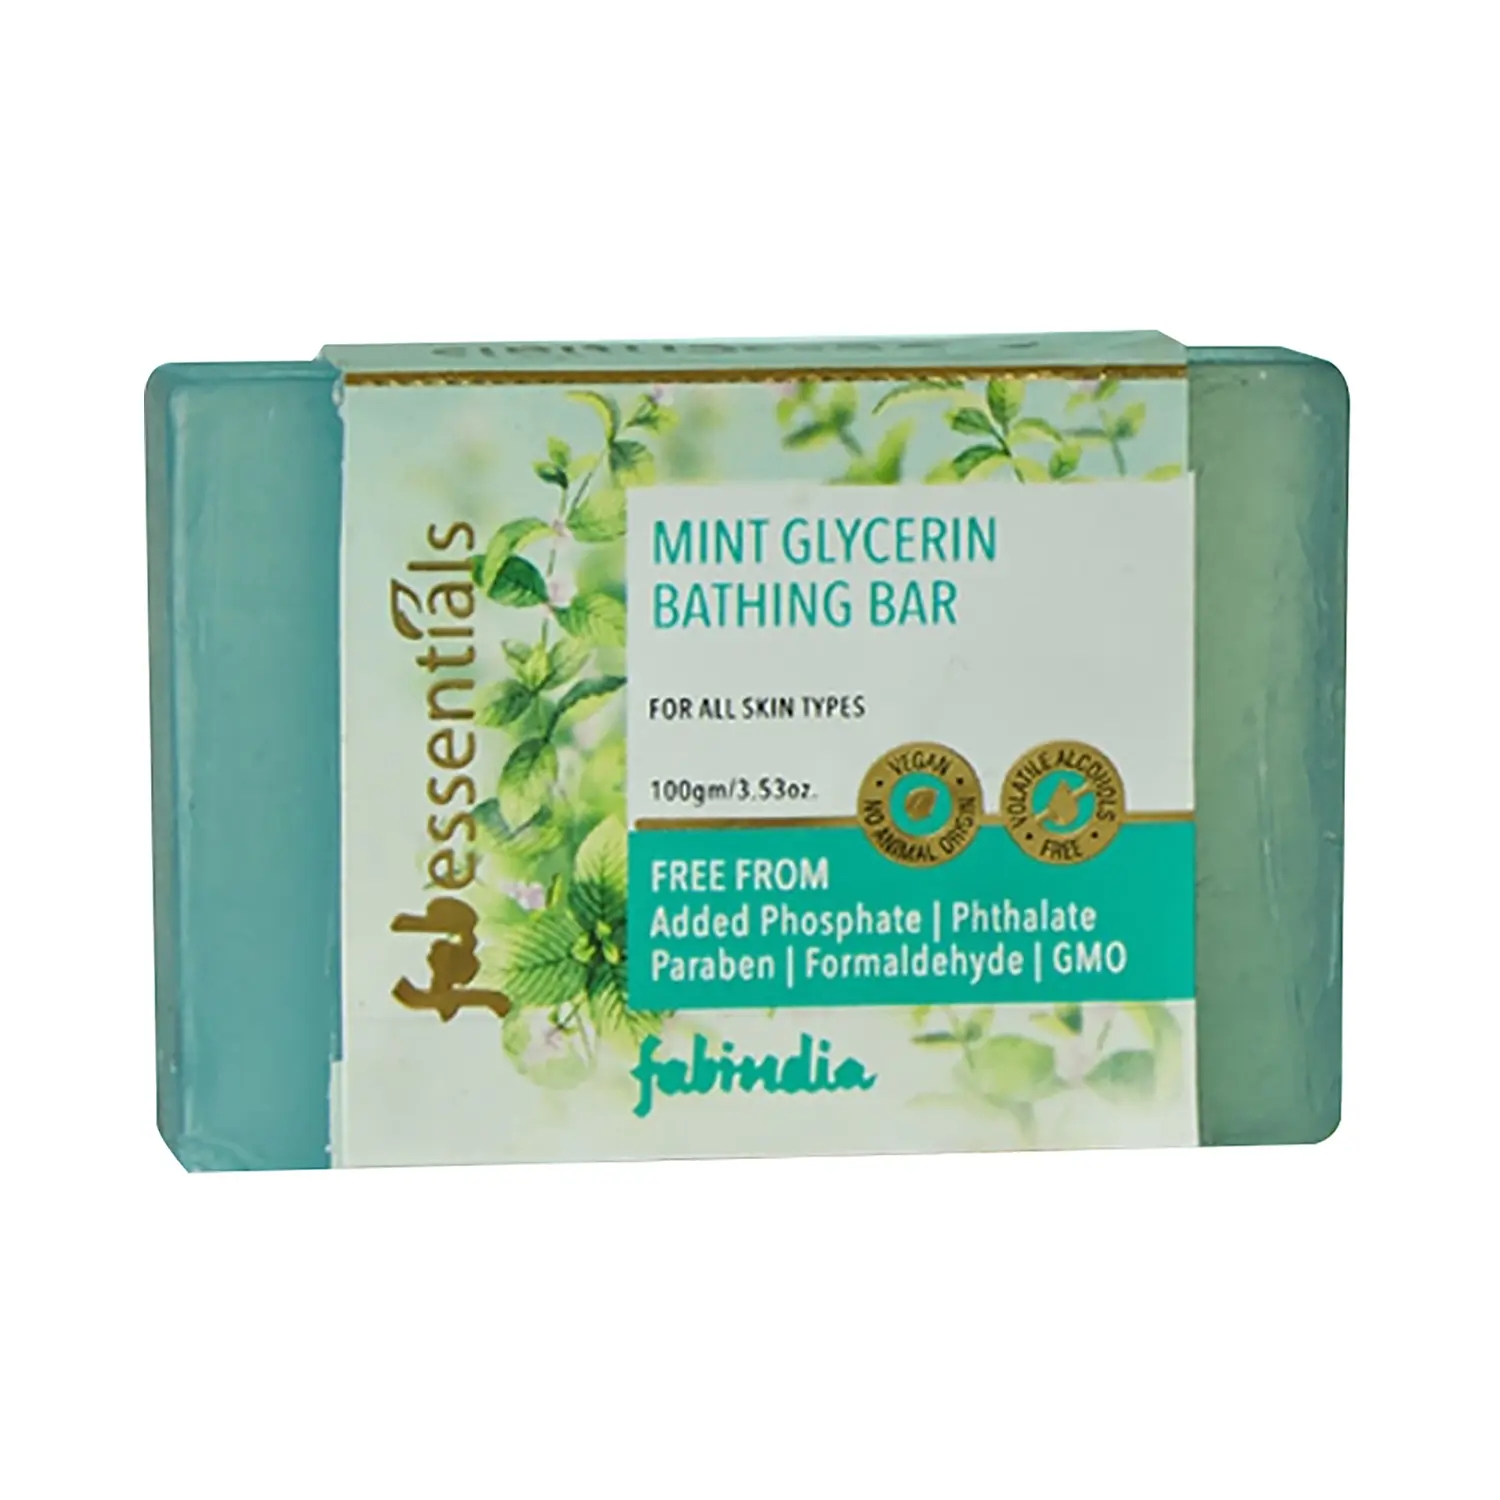 Fabessentials by Fabindia | Fabessentials by Fabindia Mint Glycerine Bathing Bar (100g)